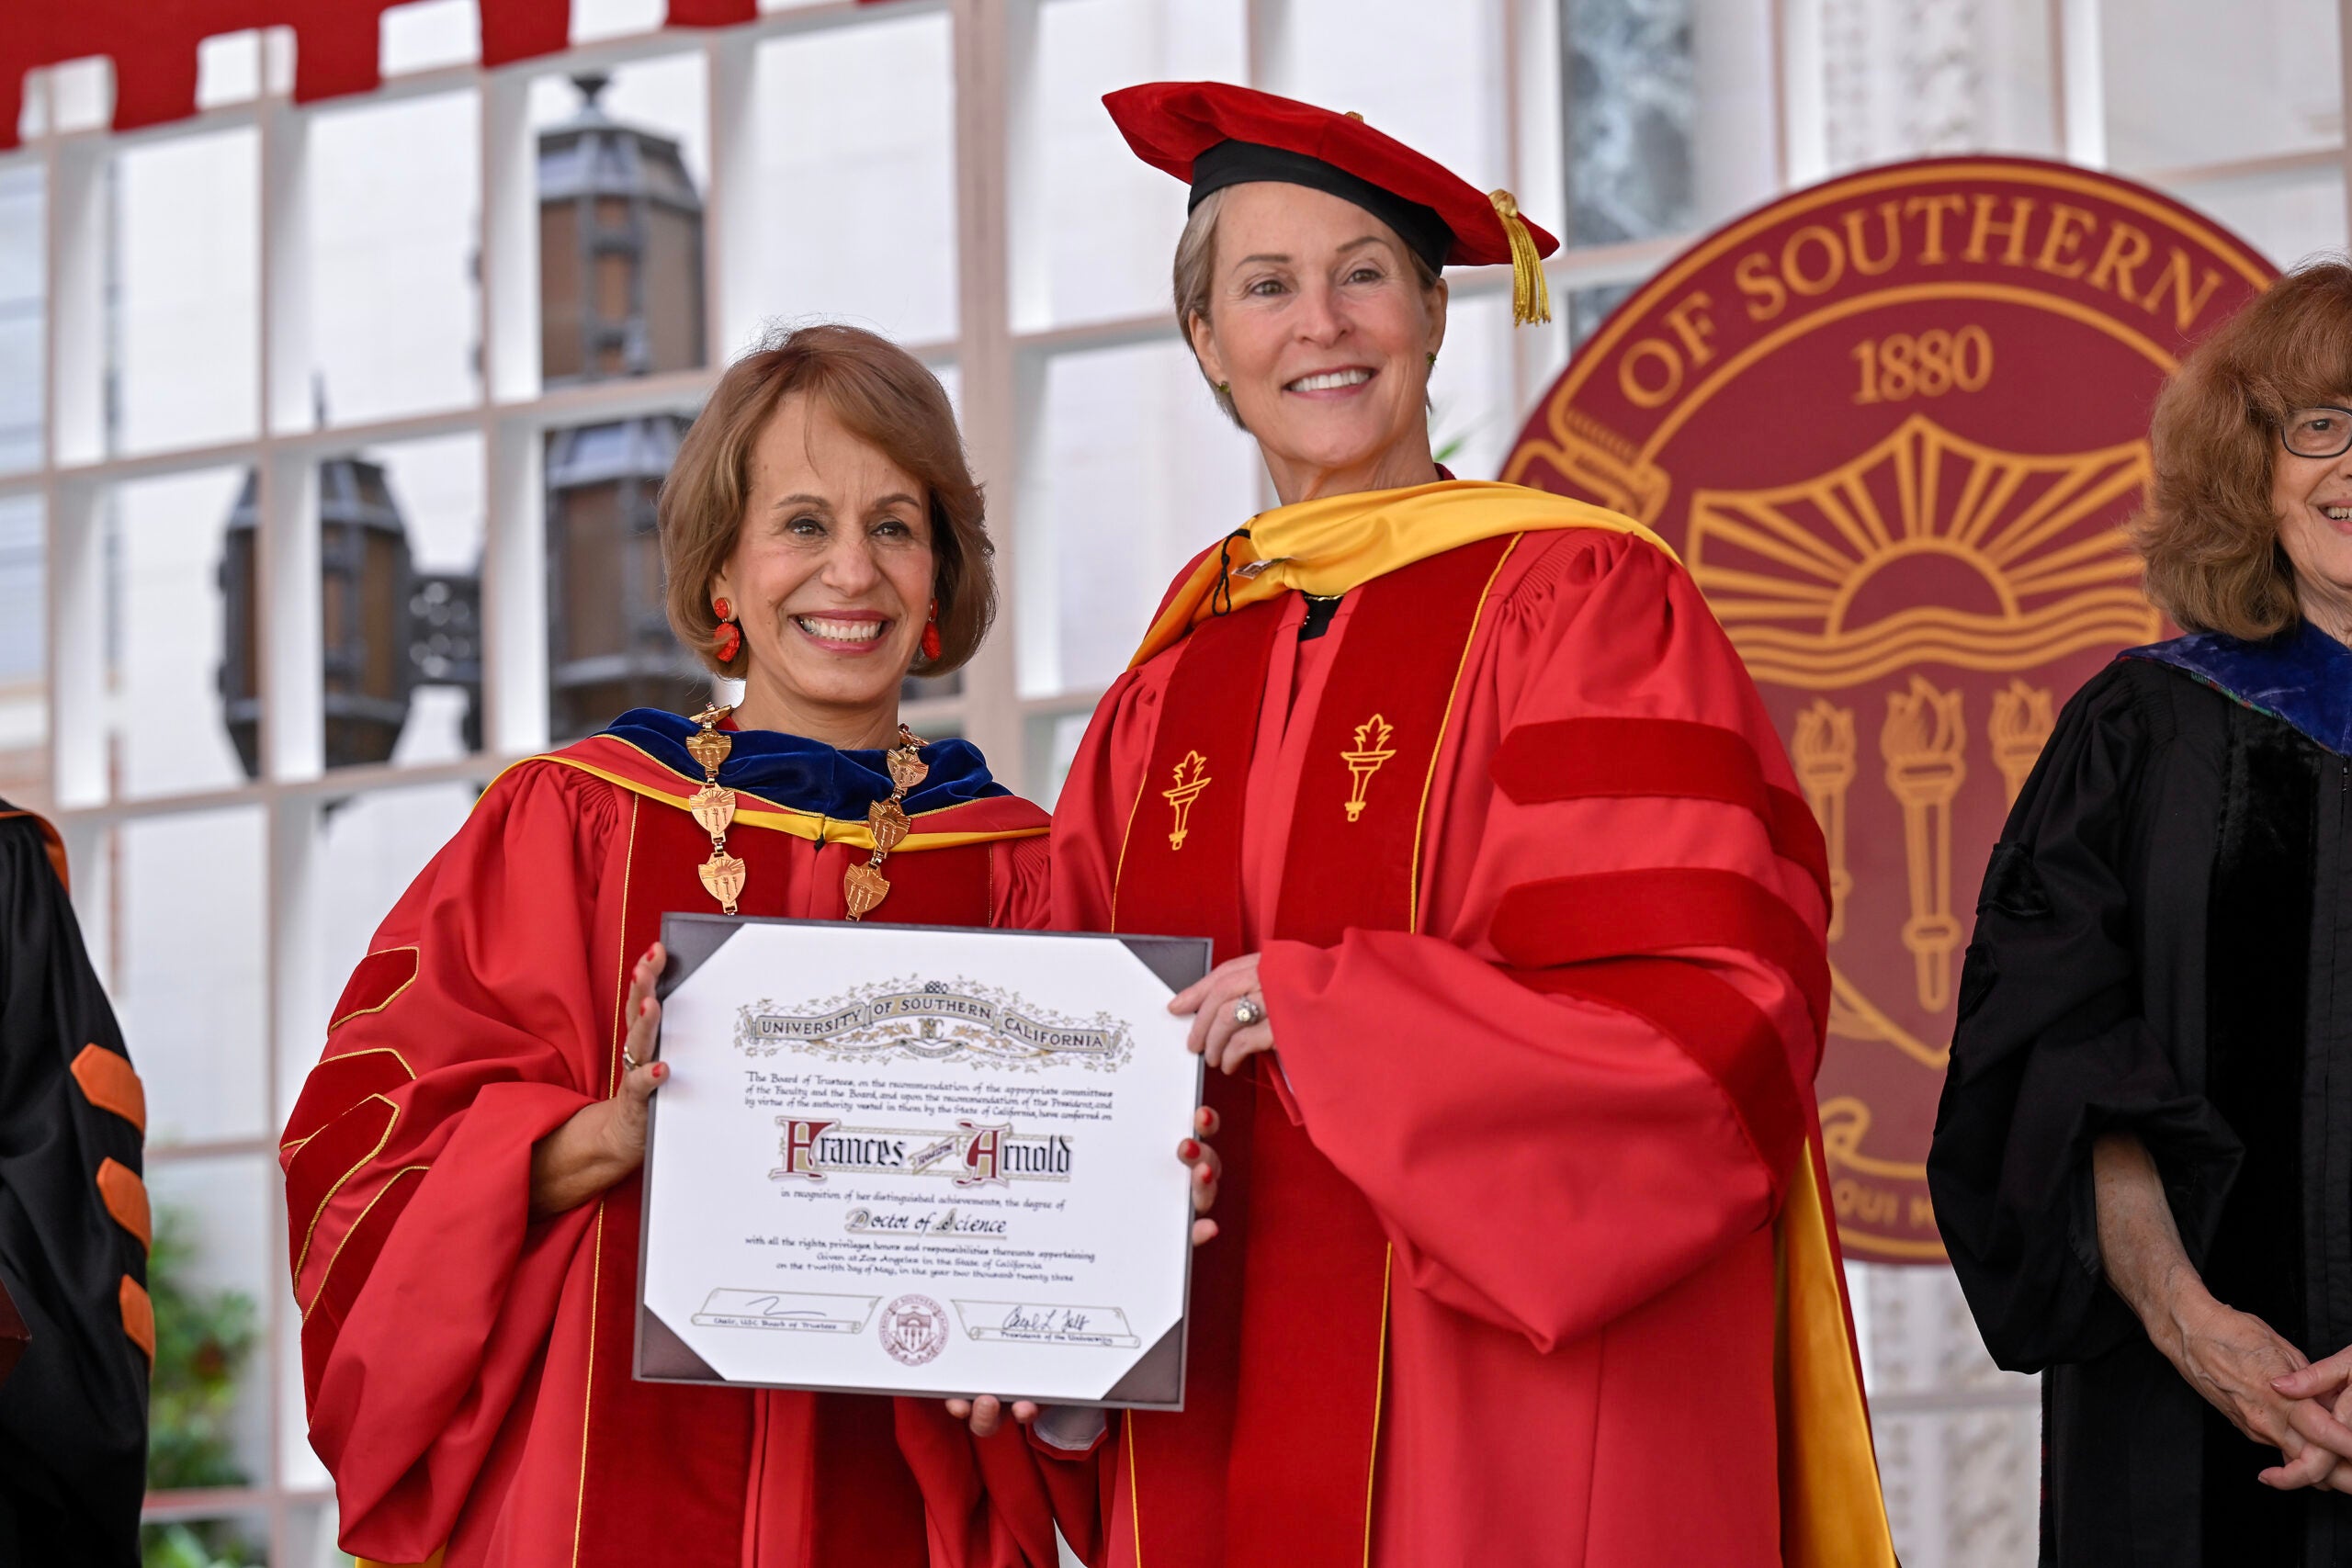 USC President Carol L. Folt presents chemist and bioengineer Frances Hamilton Arnold with a honorary doctor of science degree during the 140th commencement ceremony at the University of Southern California, May 12, 2023. (Photo/Gus Ruelas)